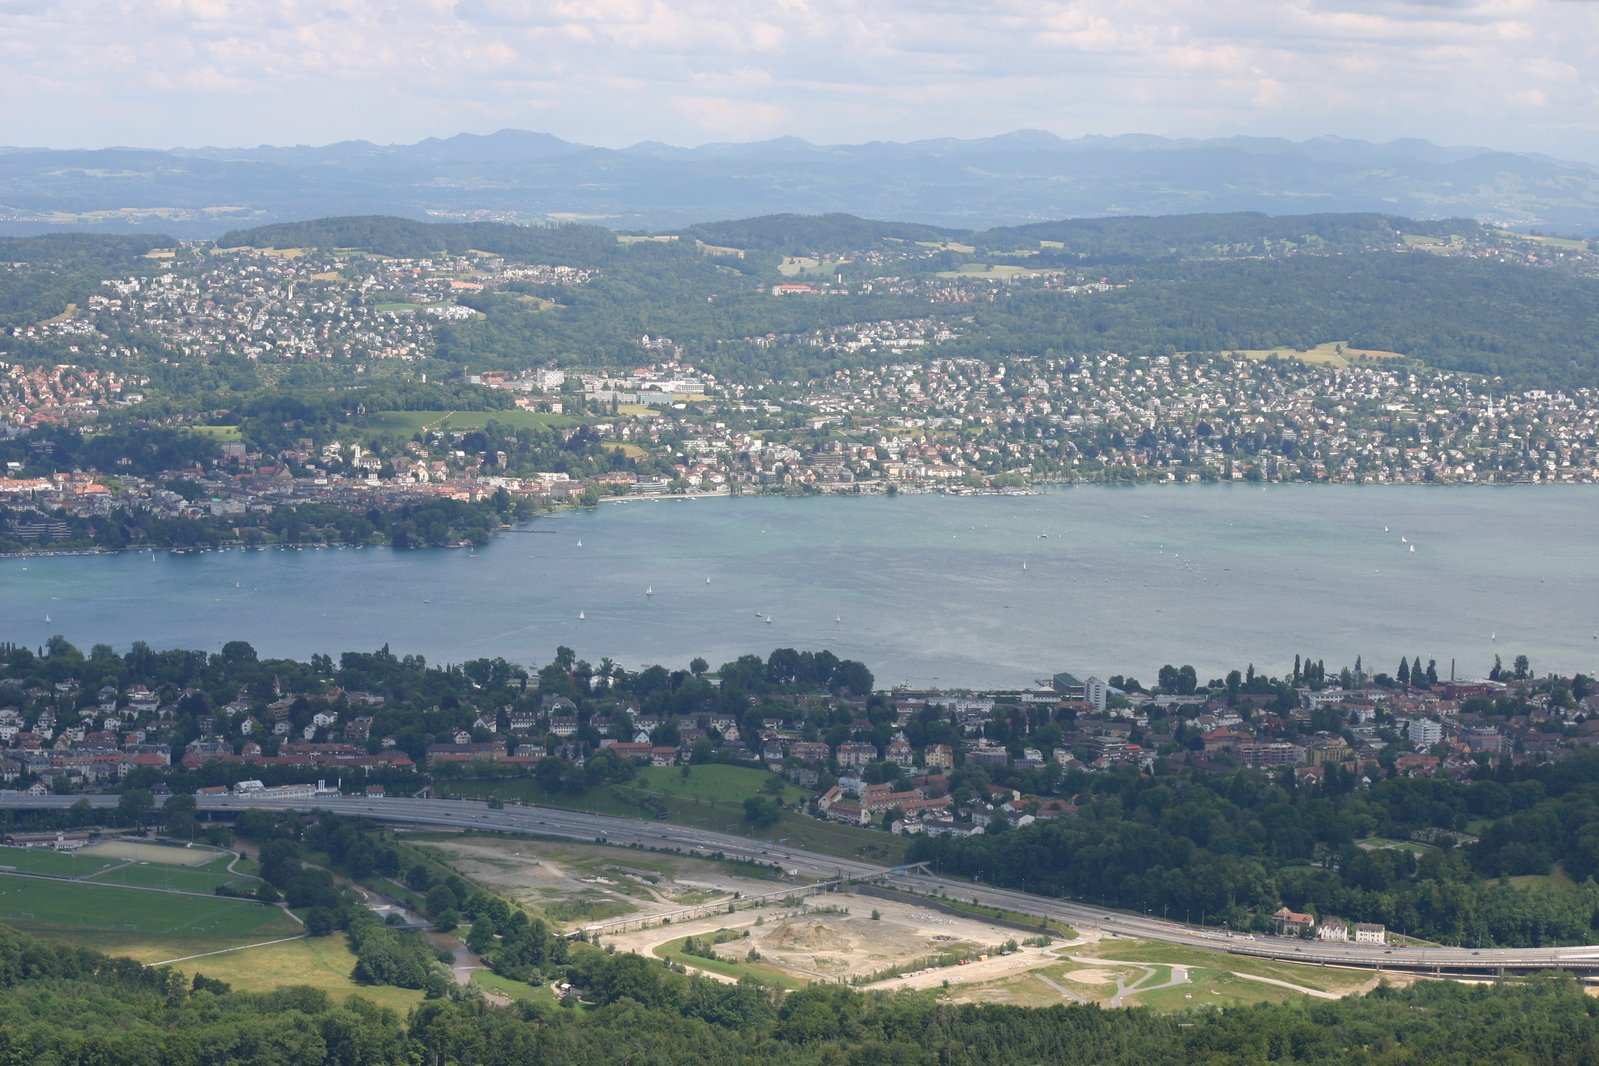 a wide view of a town, with a body of water and mountains in the distance